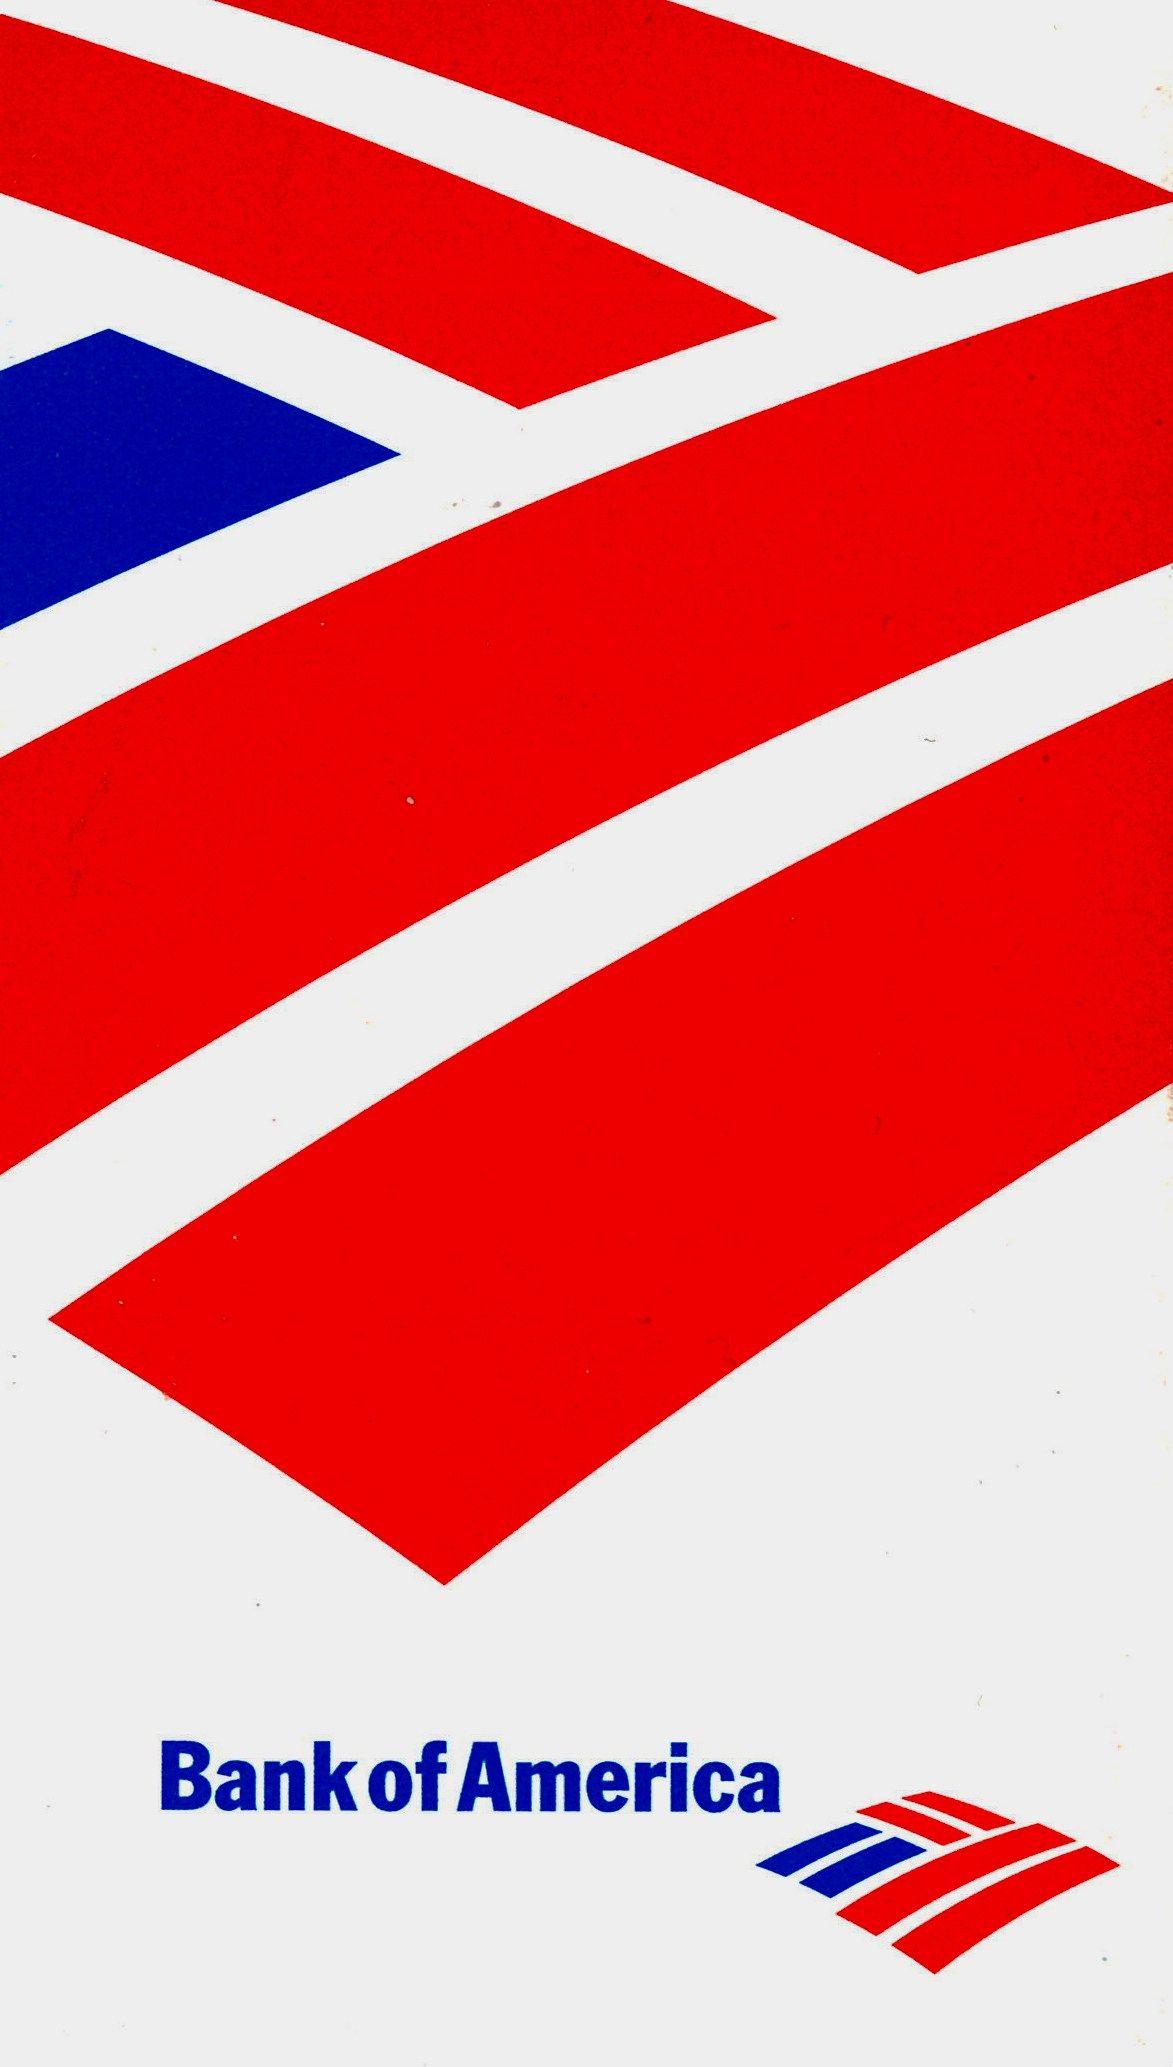 Bank of America Flag Logo - Bank of America wallet card front FINAL | Gary Frey online